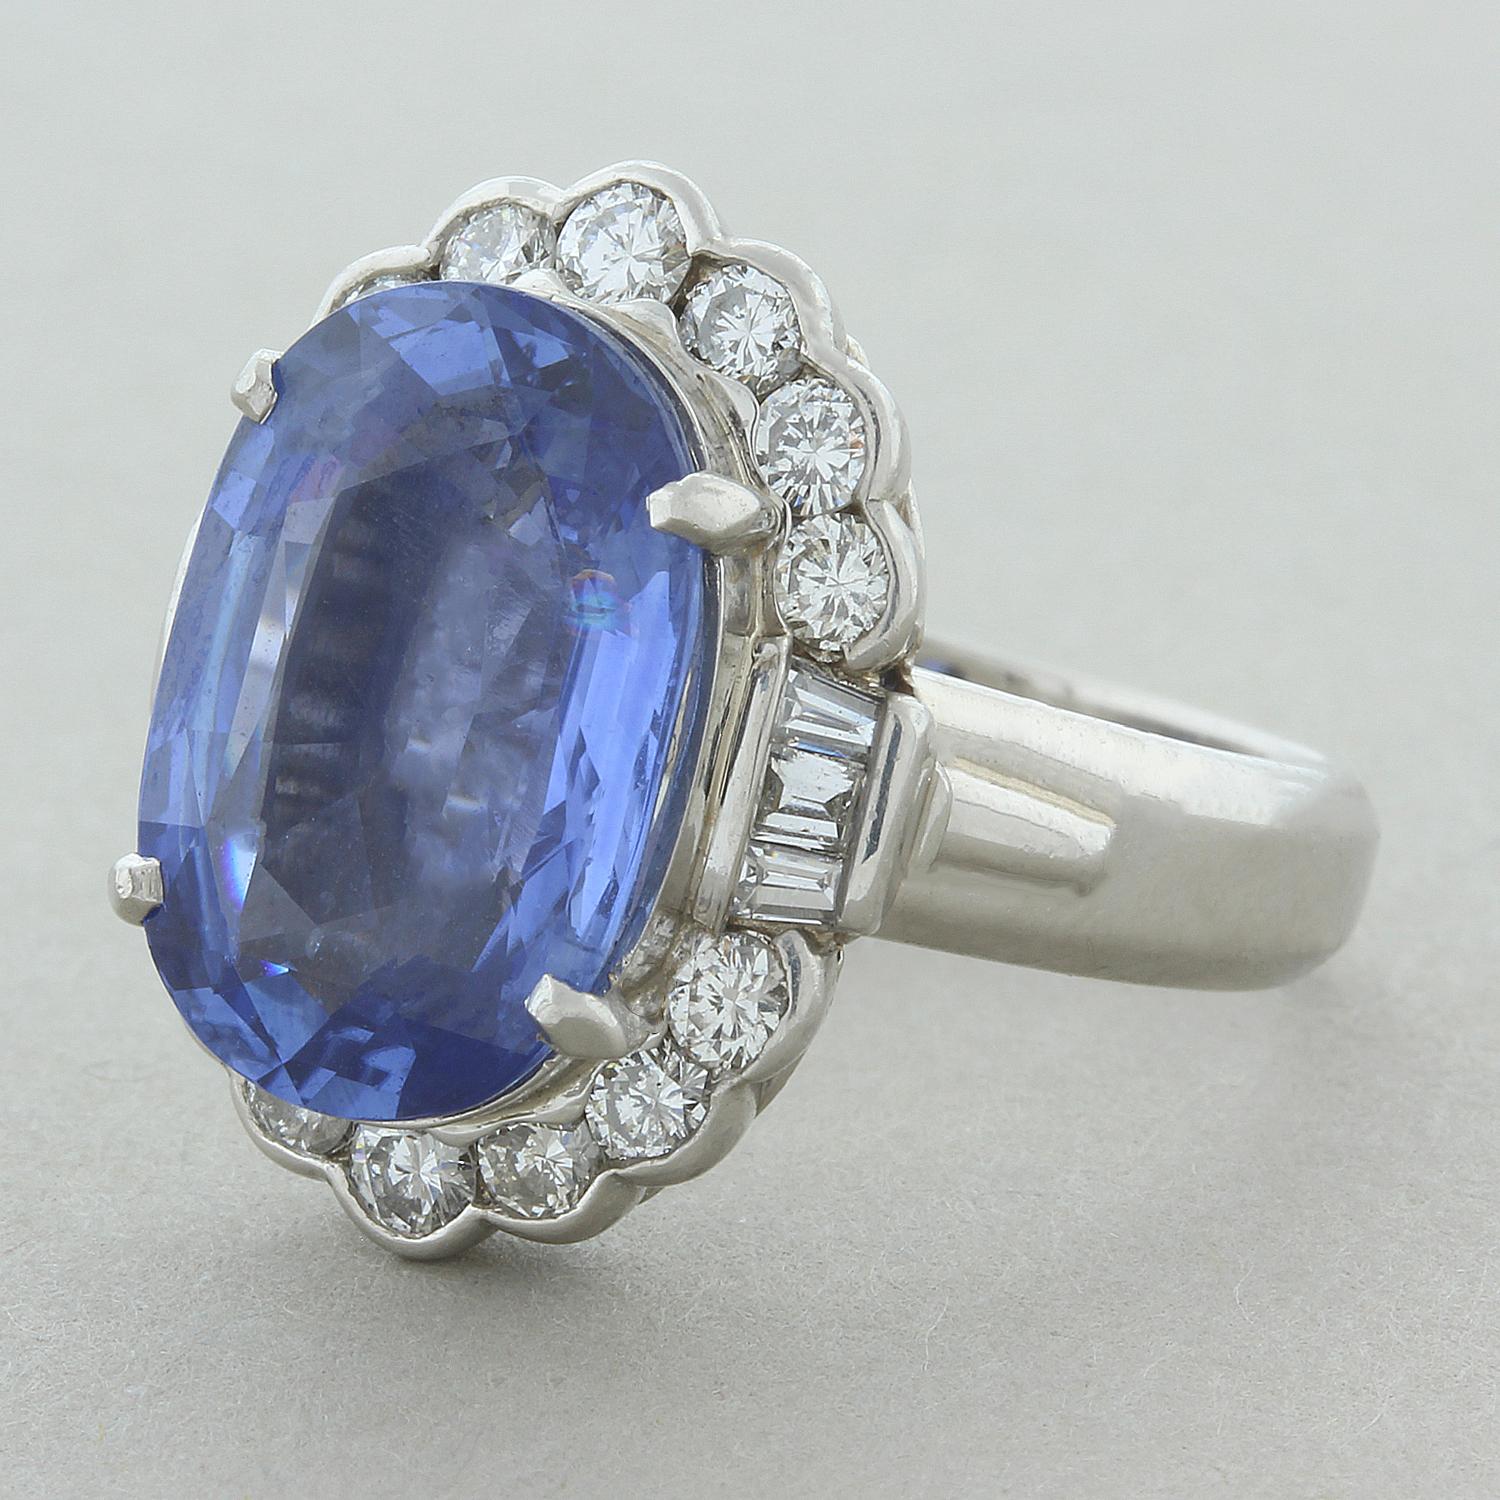 An elegant estate ring featuring a 7.38 carat gem quality luscious blue sapphire. The beautifully shaped oval cut sapphire is haloed by 0.88 carats of sparkling colorless round cut diamonds with three baguette cut diamonds on each side creating a